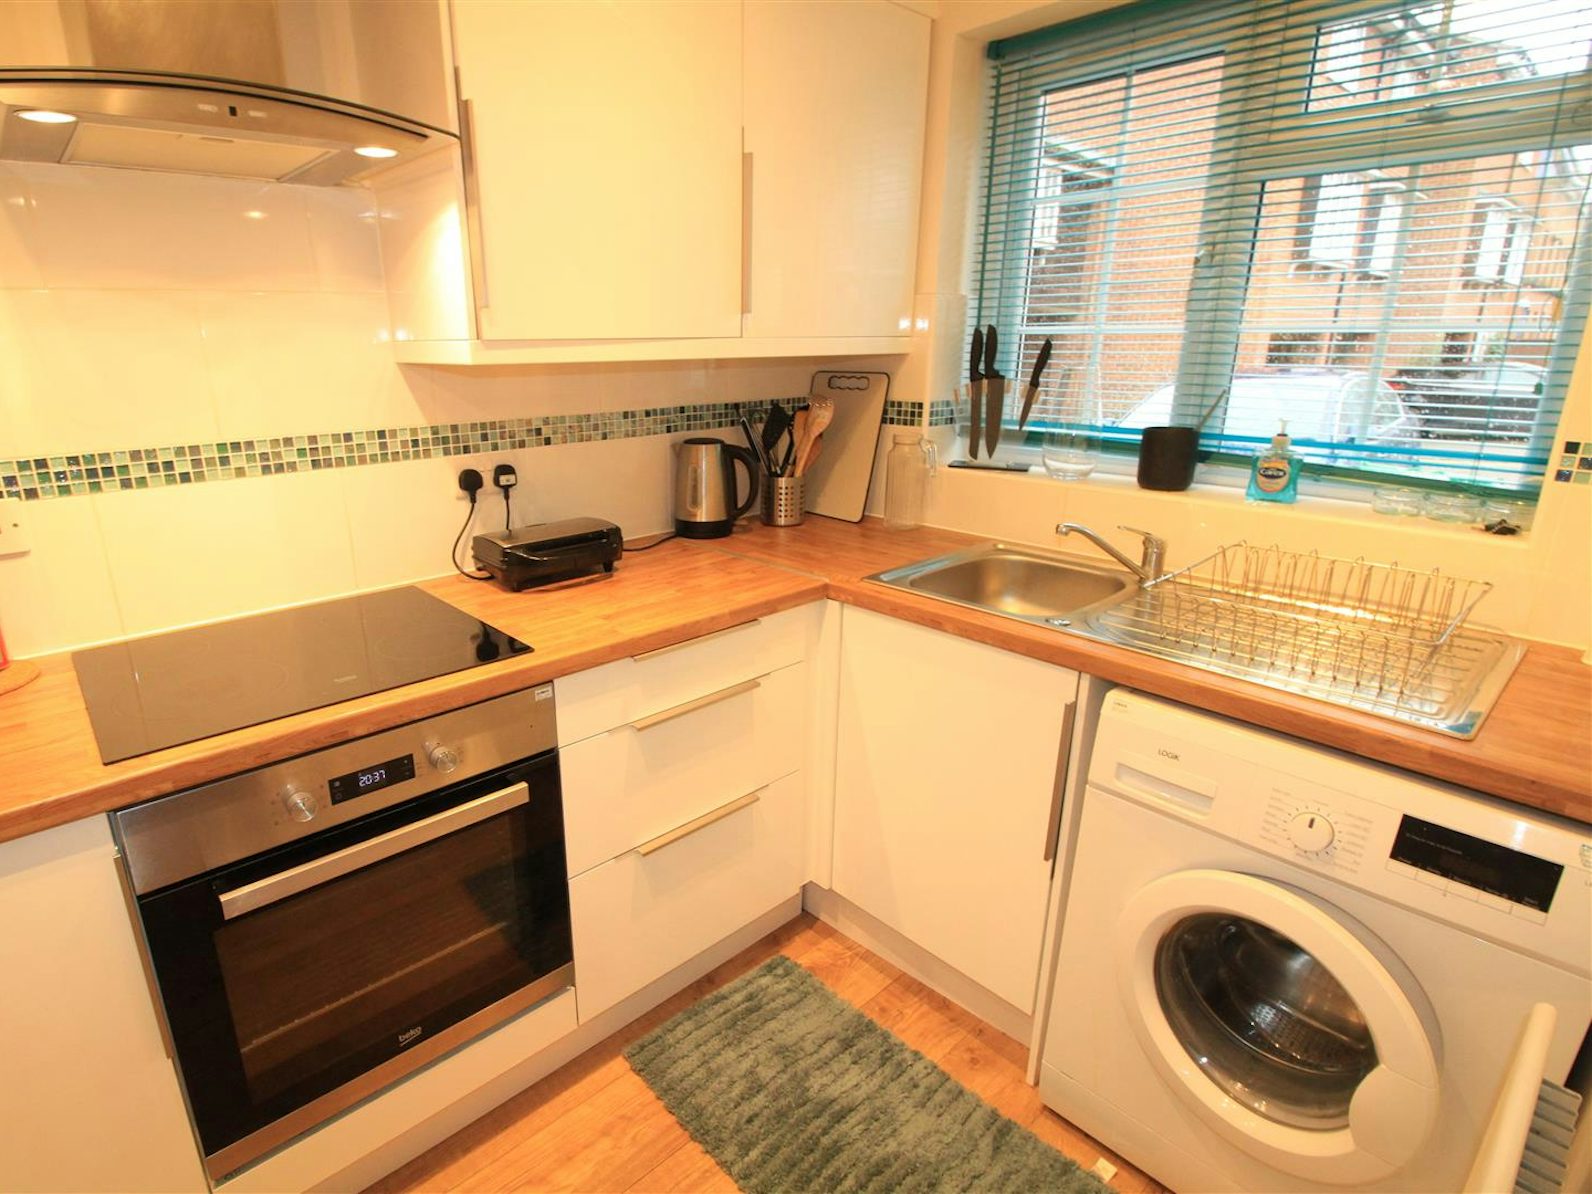 House to rent on Matlock Court Nottingham, NG1